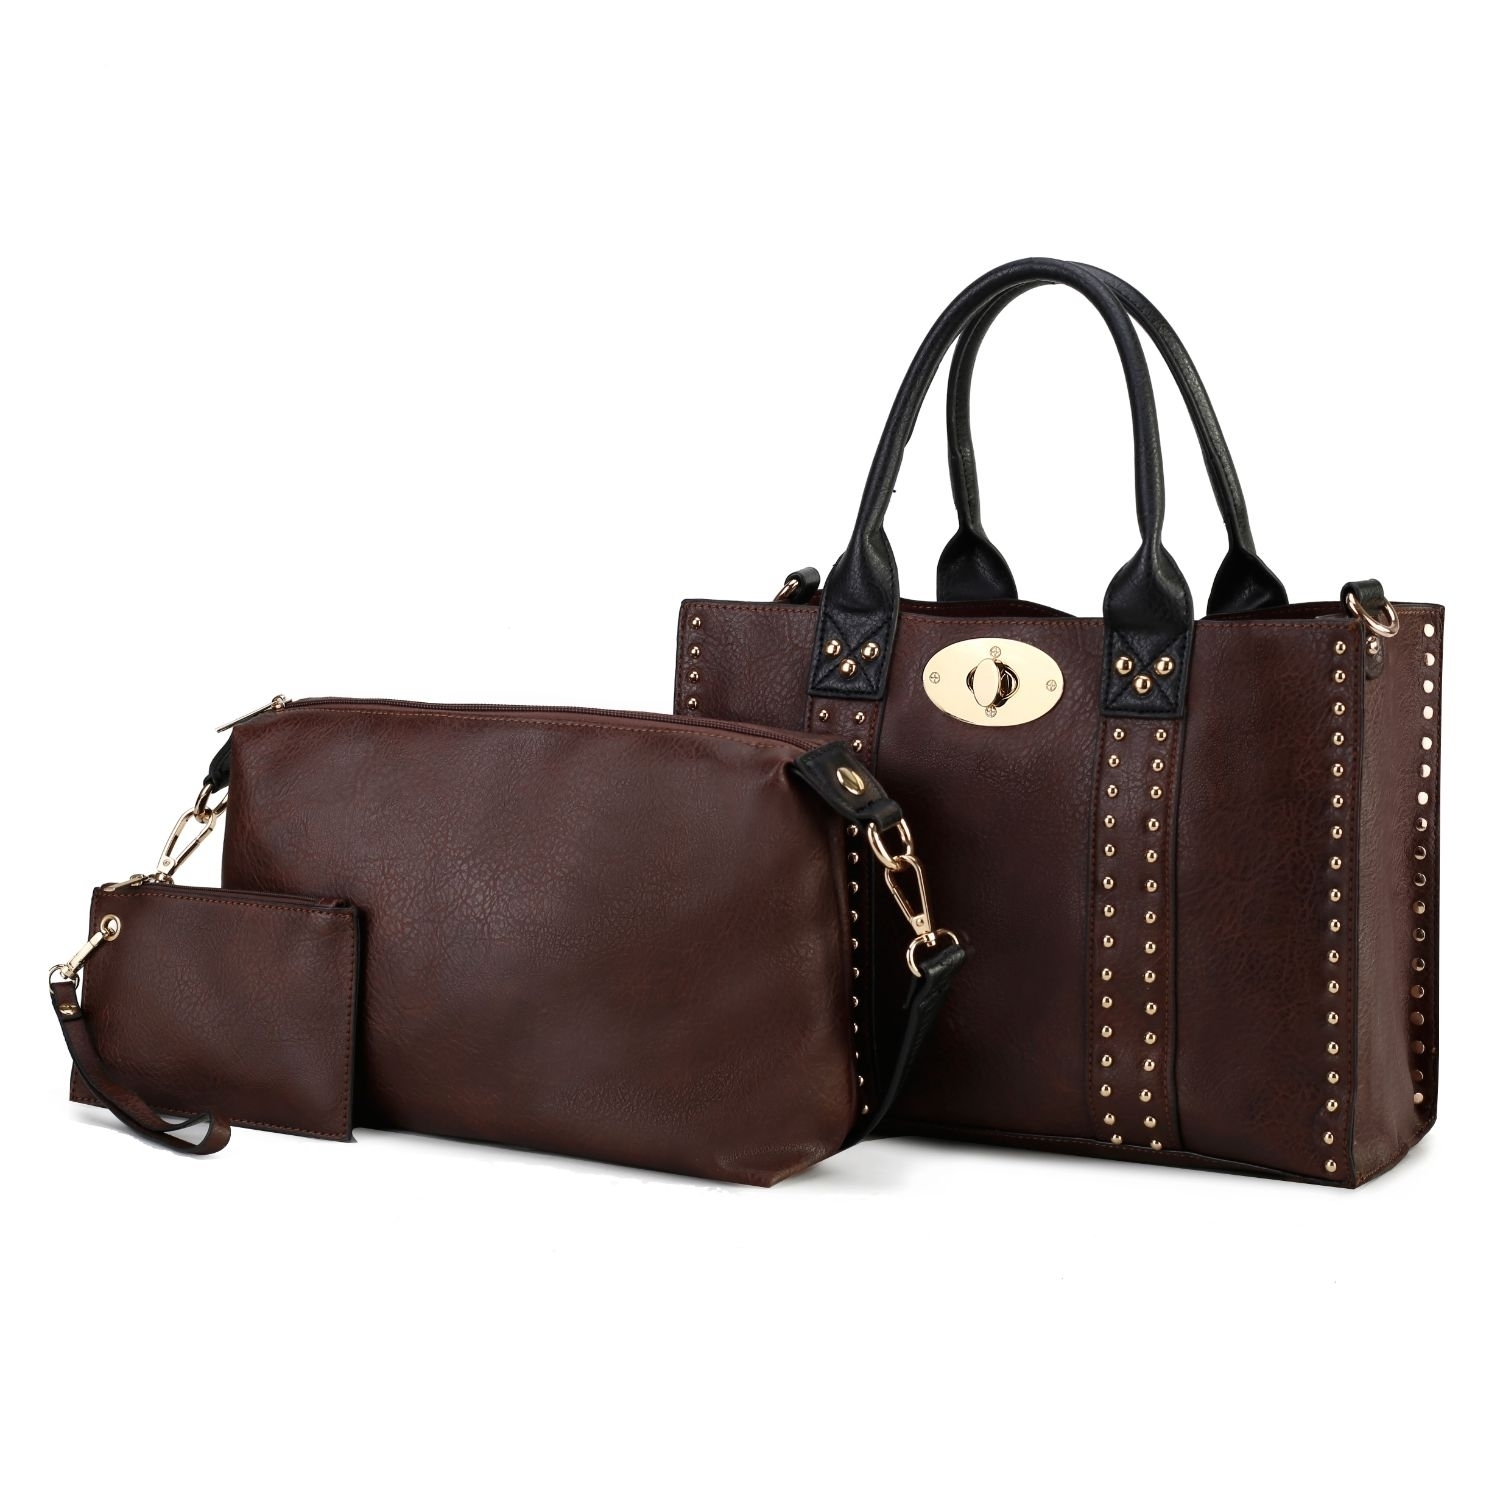 MKF Collection Elissa 3 Pc Set Satchel Handbag With Pouch & Coin Purse By Mia K. - Black-brown